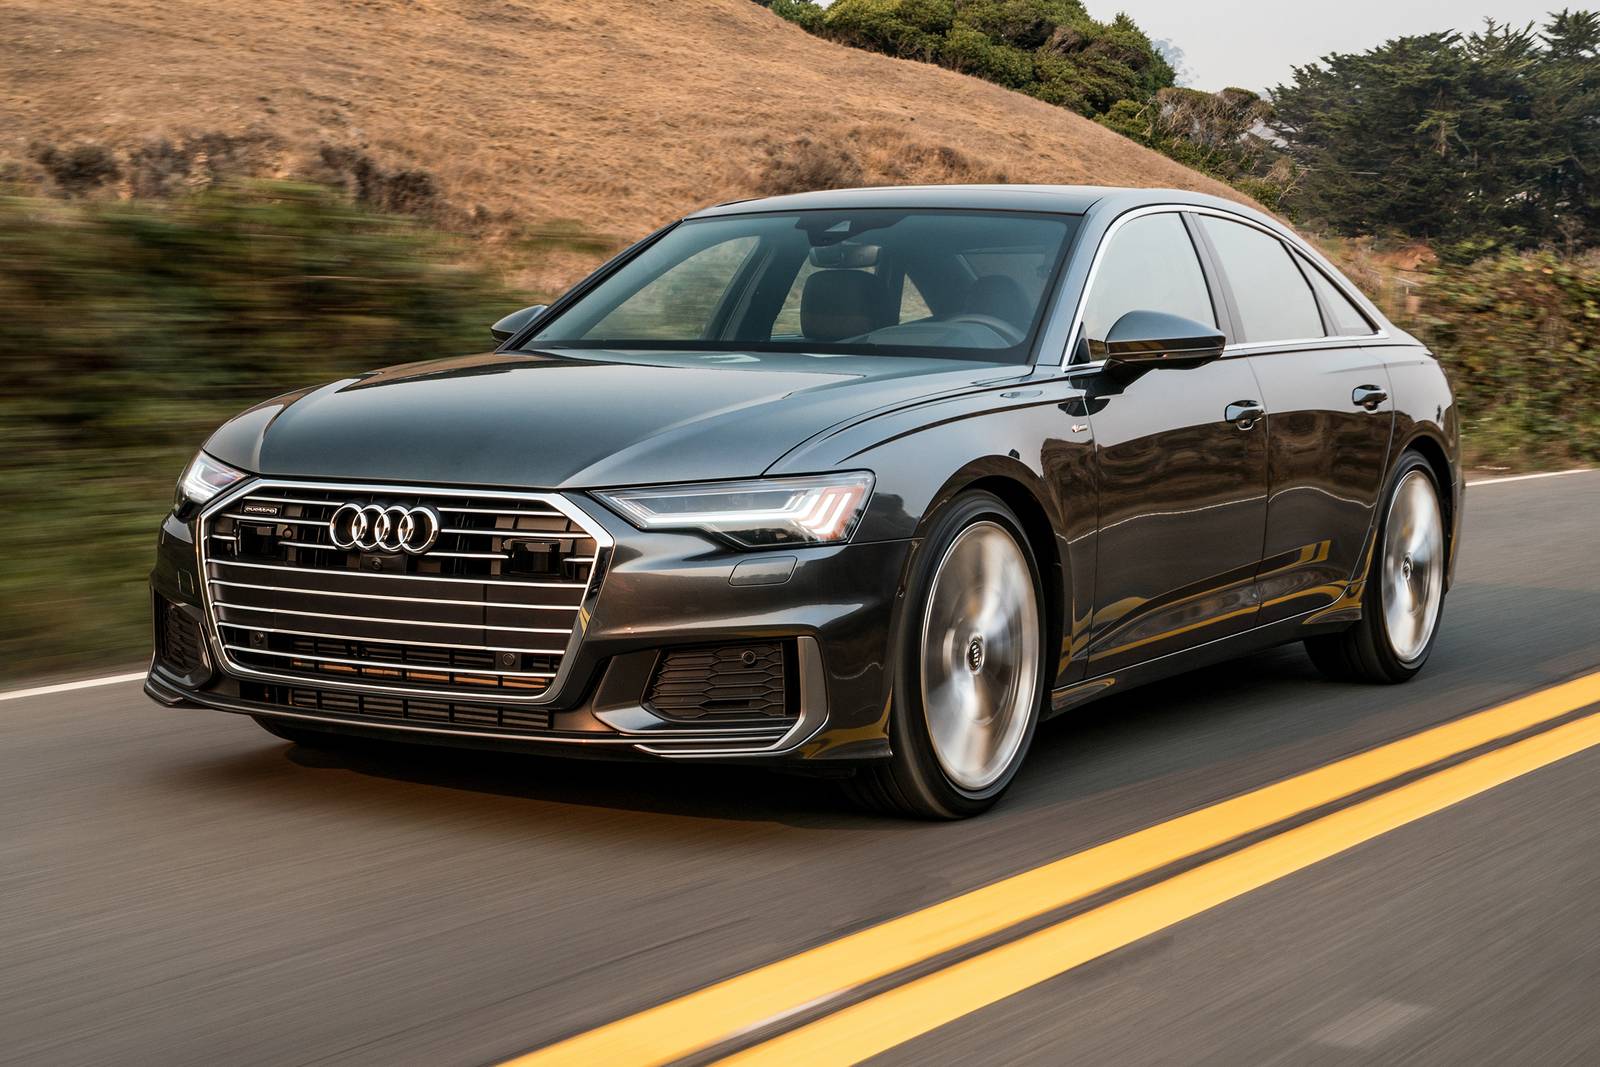 2020 The Audi A6 Release